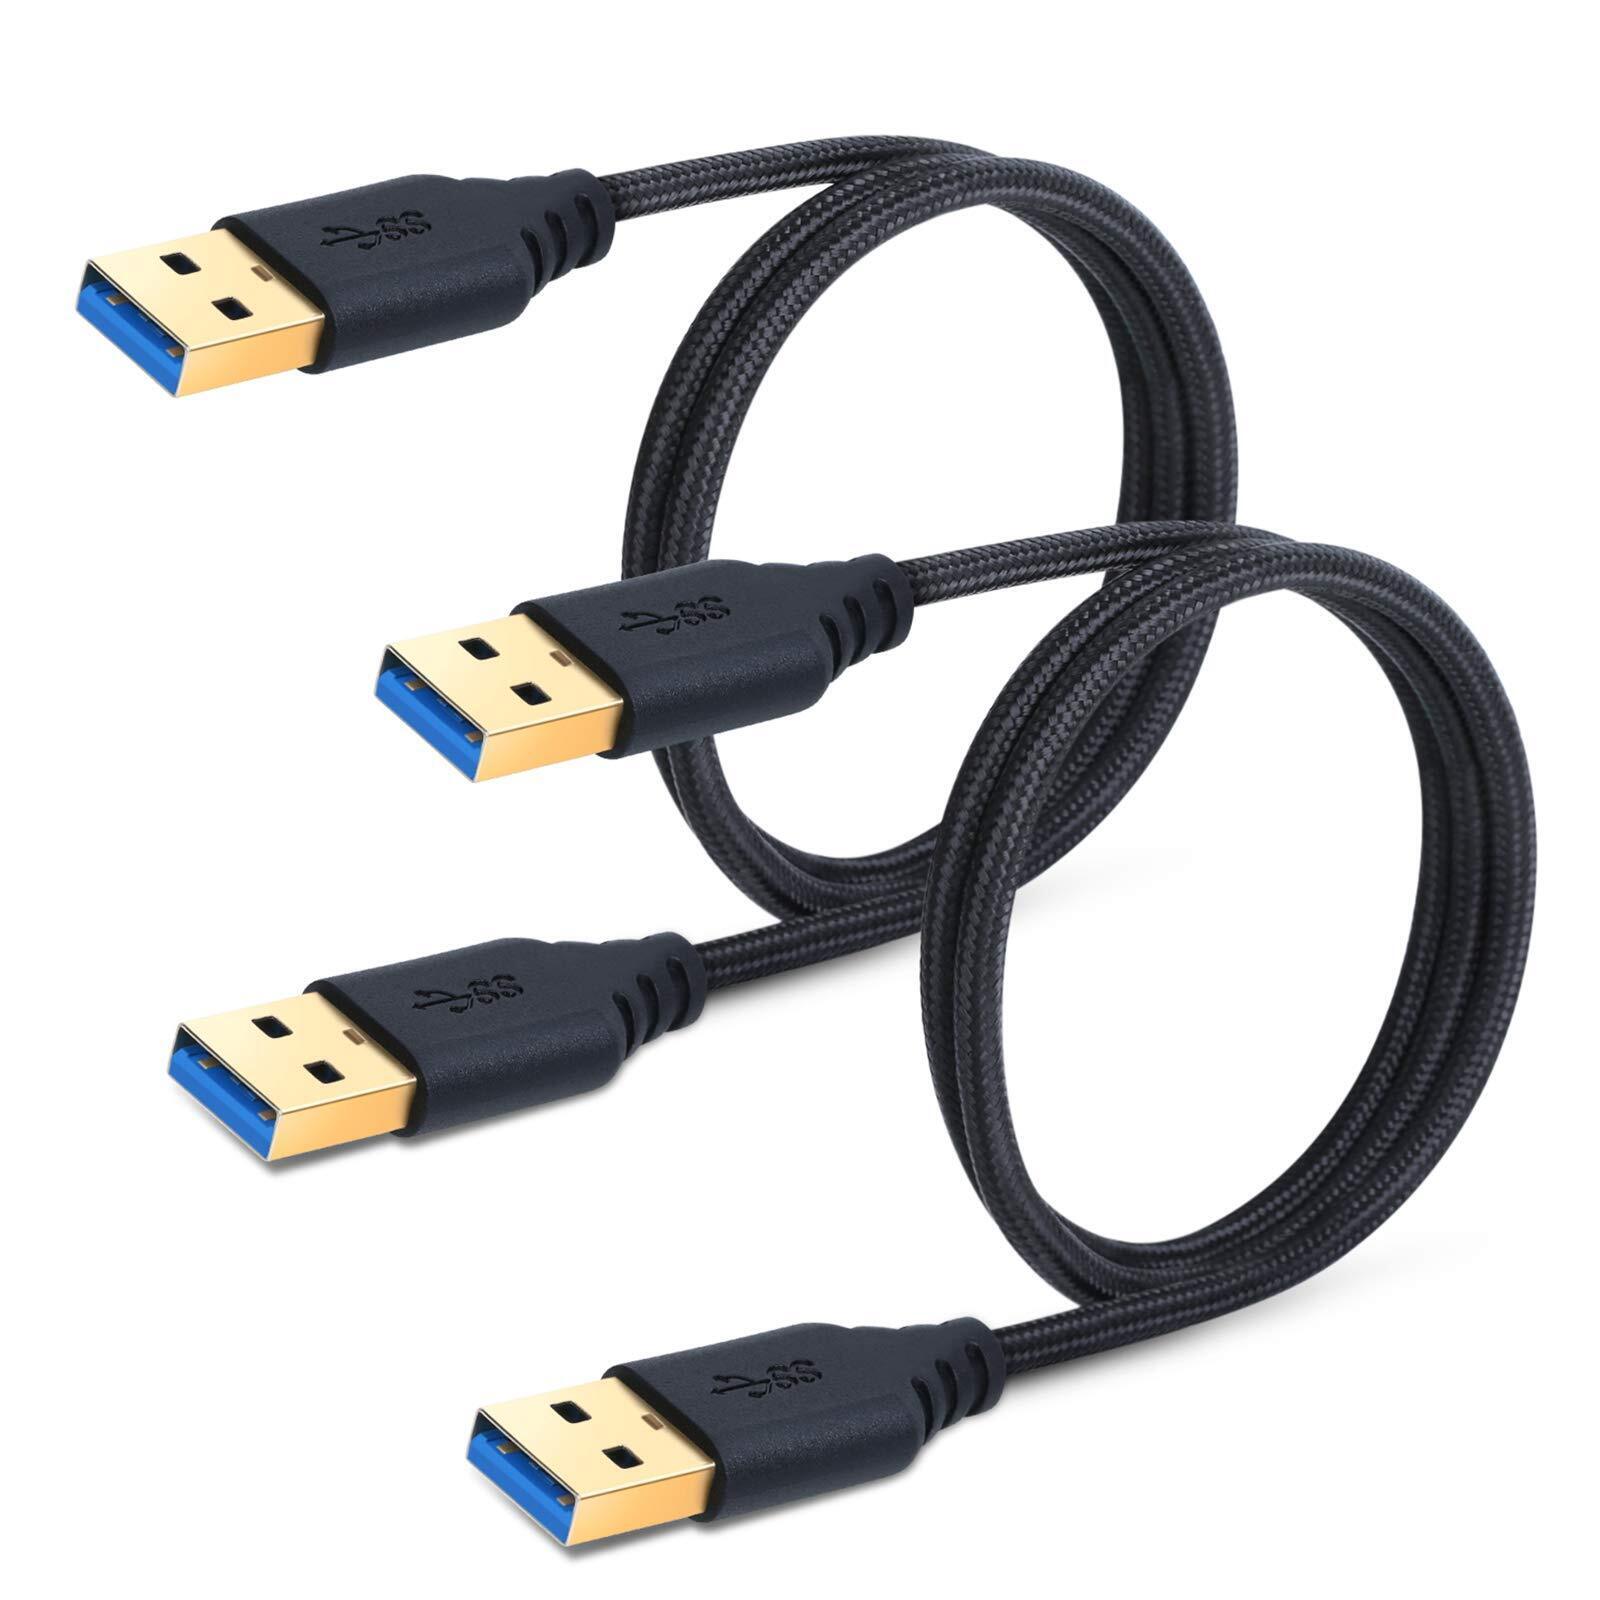 USB to USB Cable Cord, 2-Pack 3FT/1M Braided USB 3.0 Type A Male to Male Cabl...